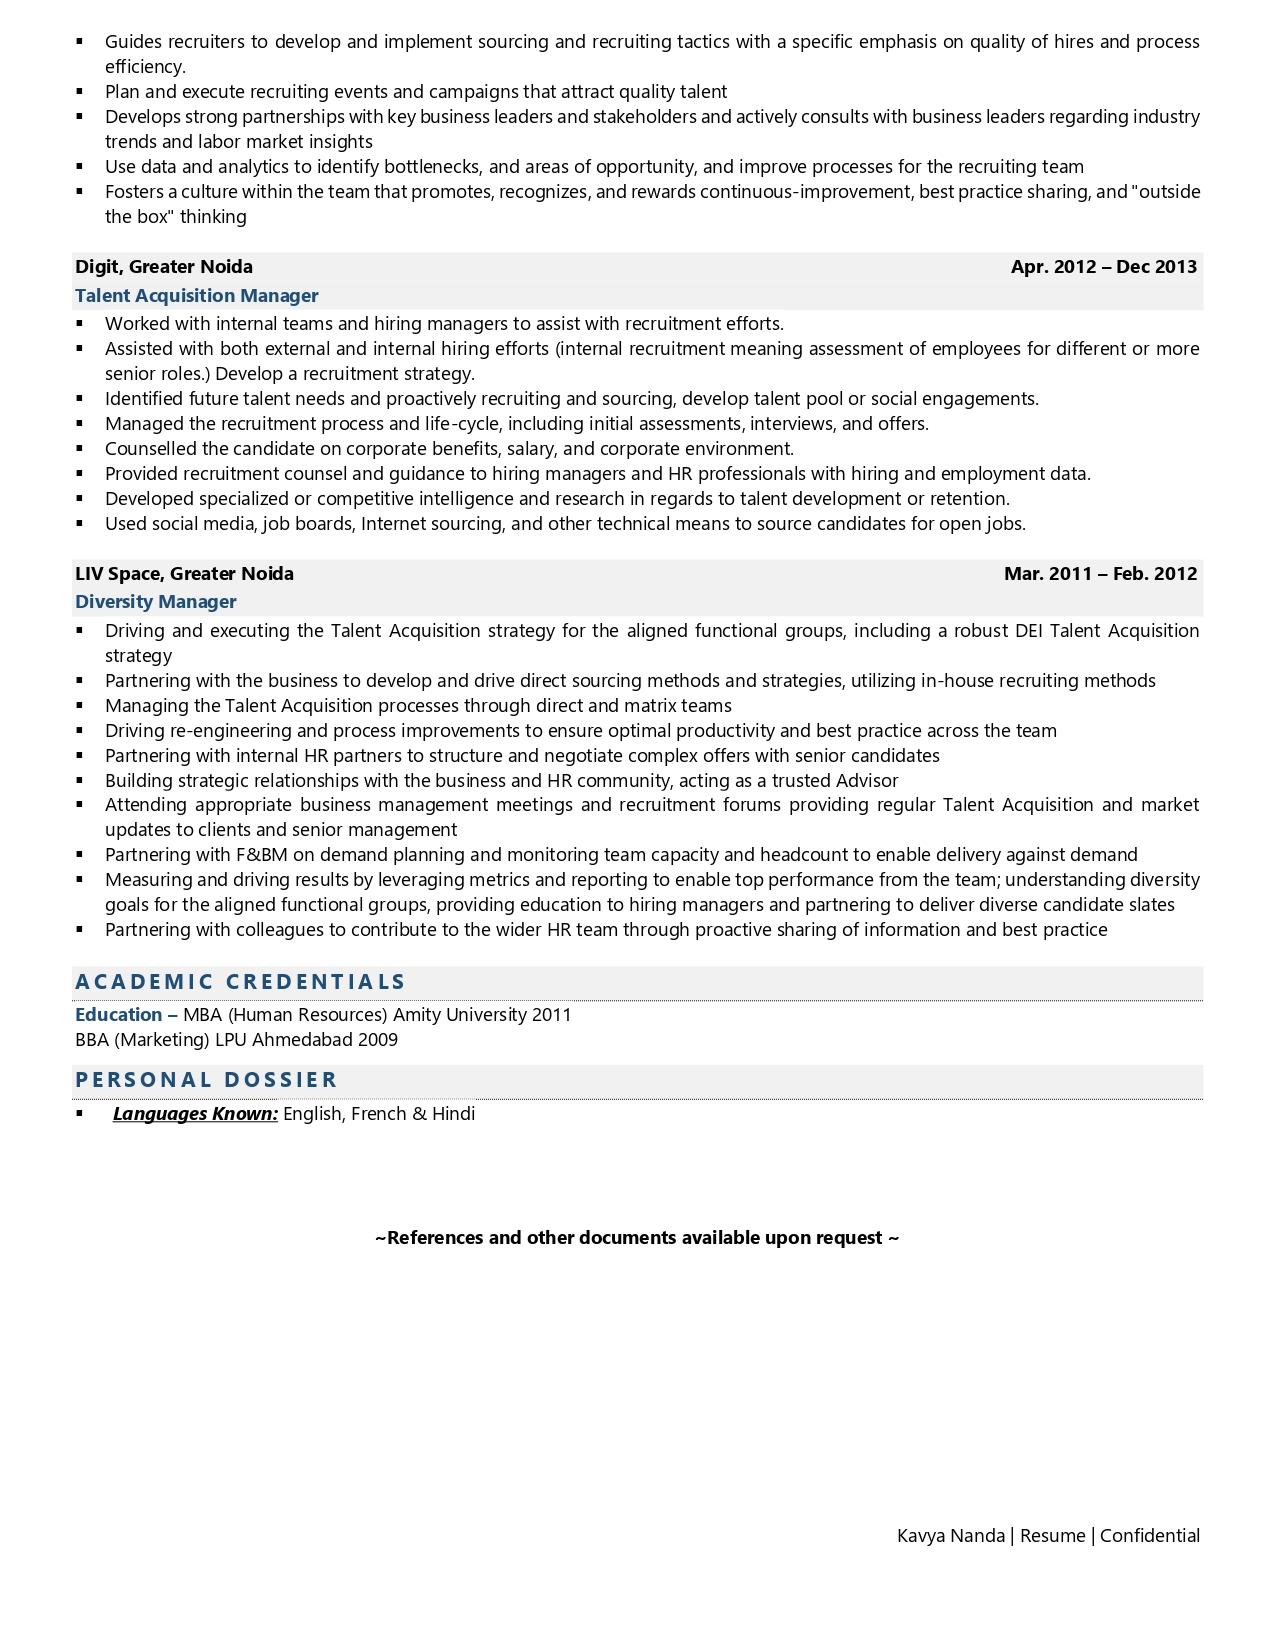 Talent Acquisition Manager - Resume Example & Template